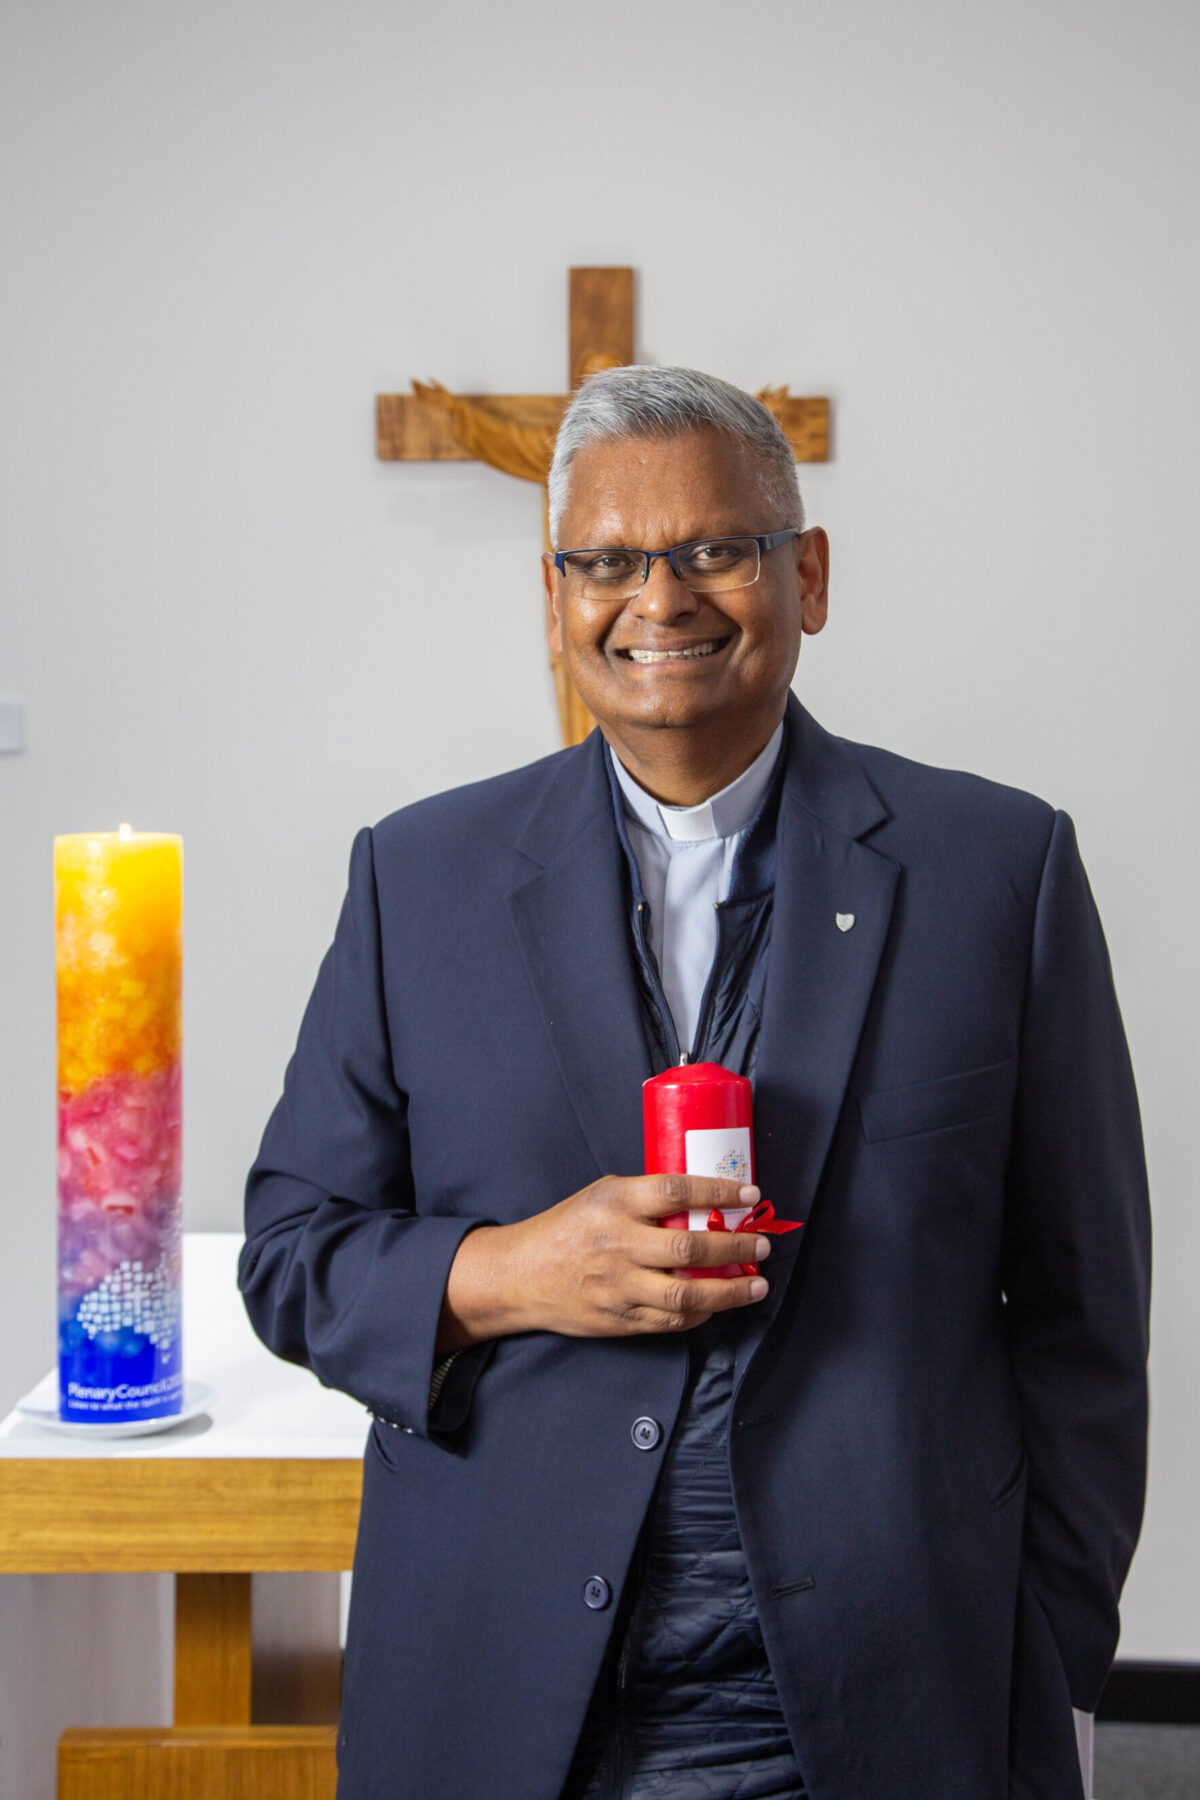 Fr Chris de Souza has been appointed as new general secretary